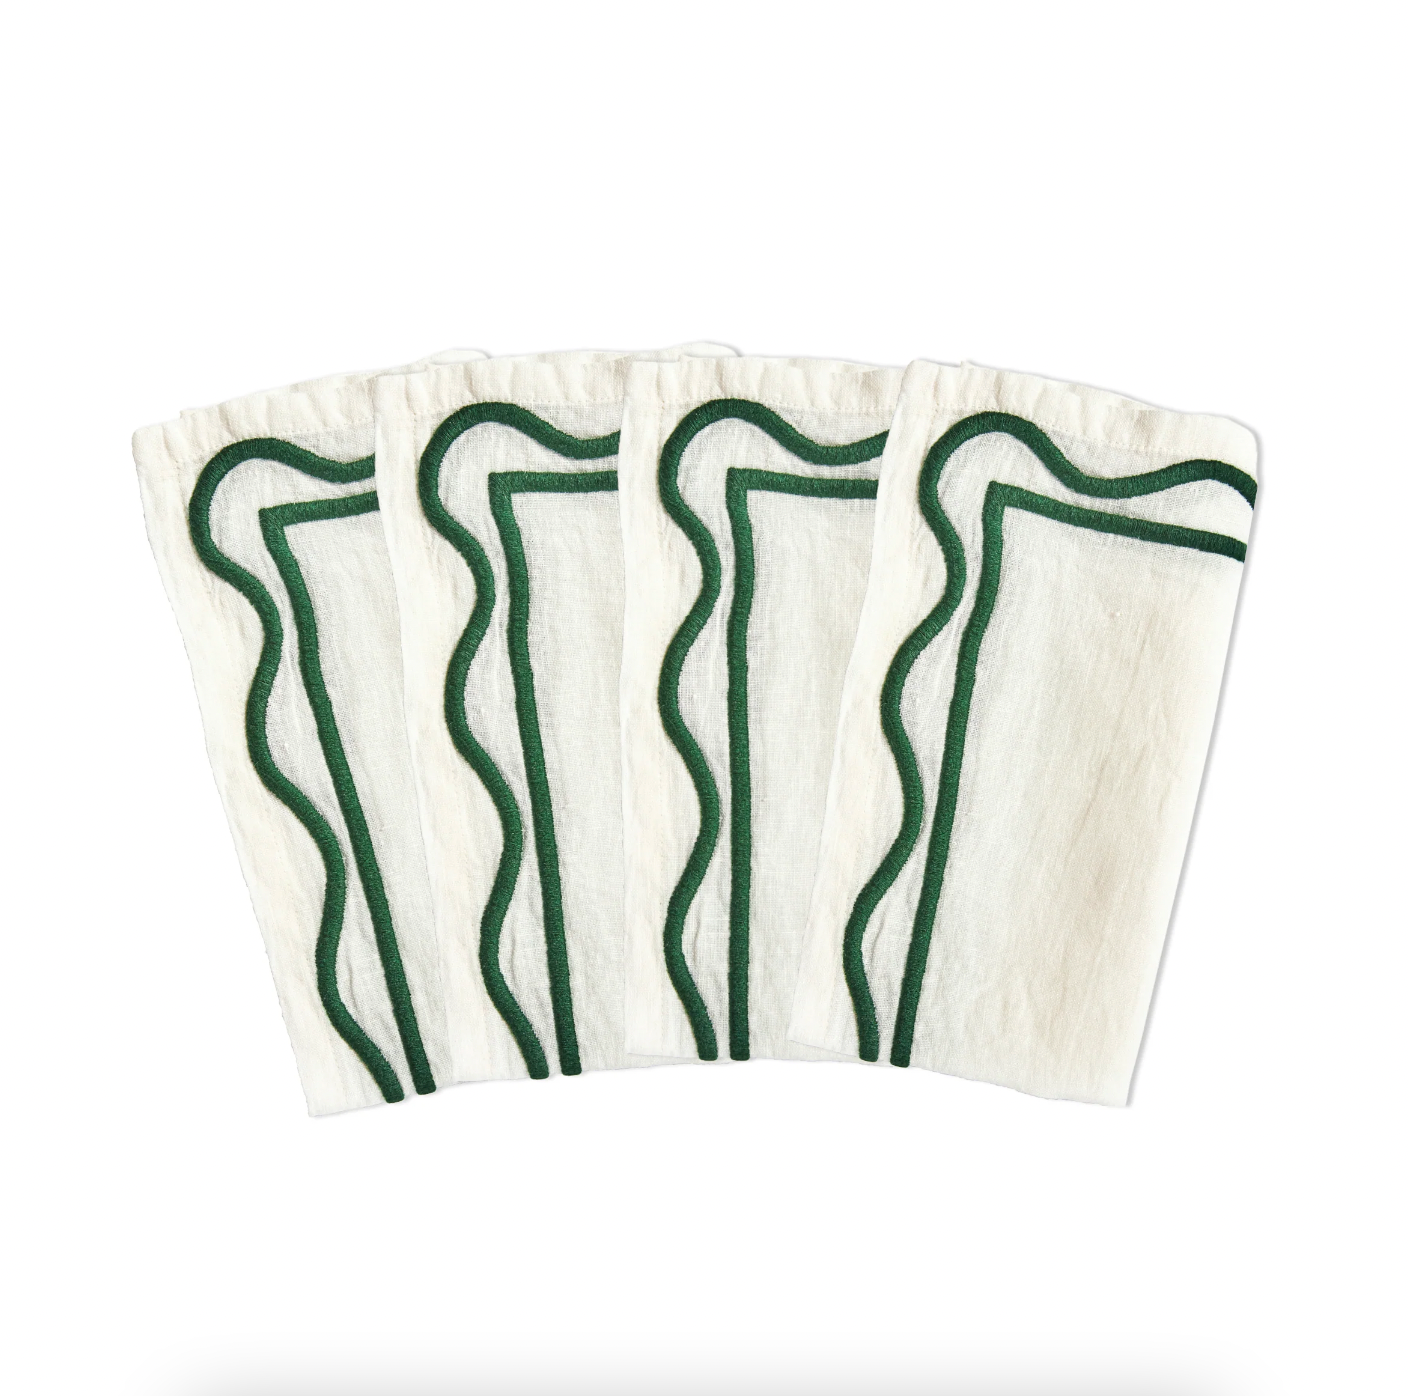 Product Image for Colorblock Embroidered Linen Napkins, Dark Green (Set of 4)